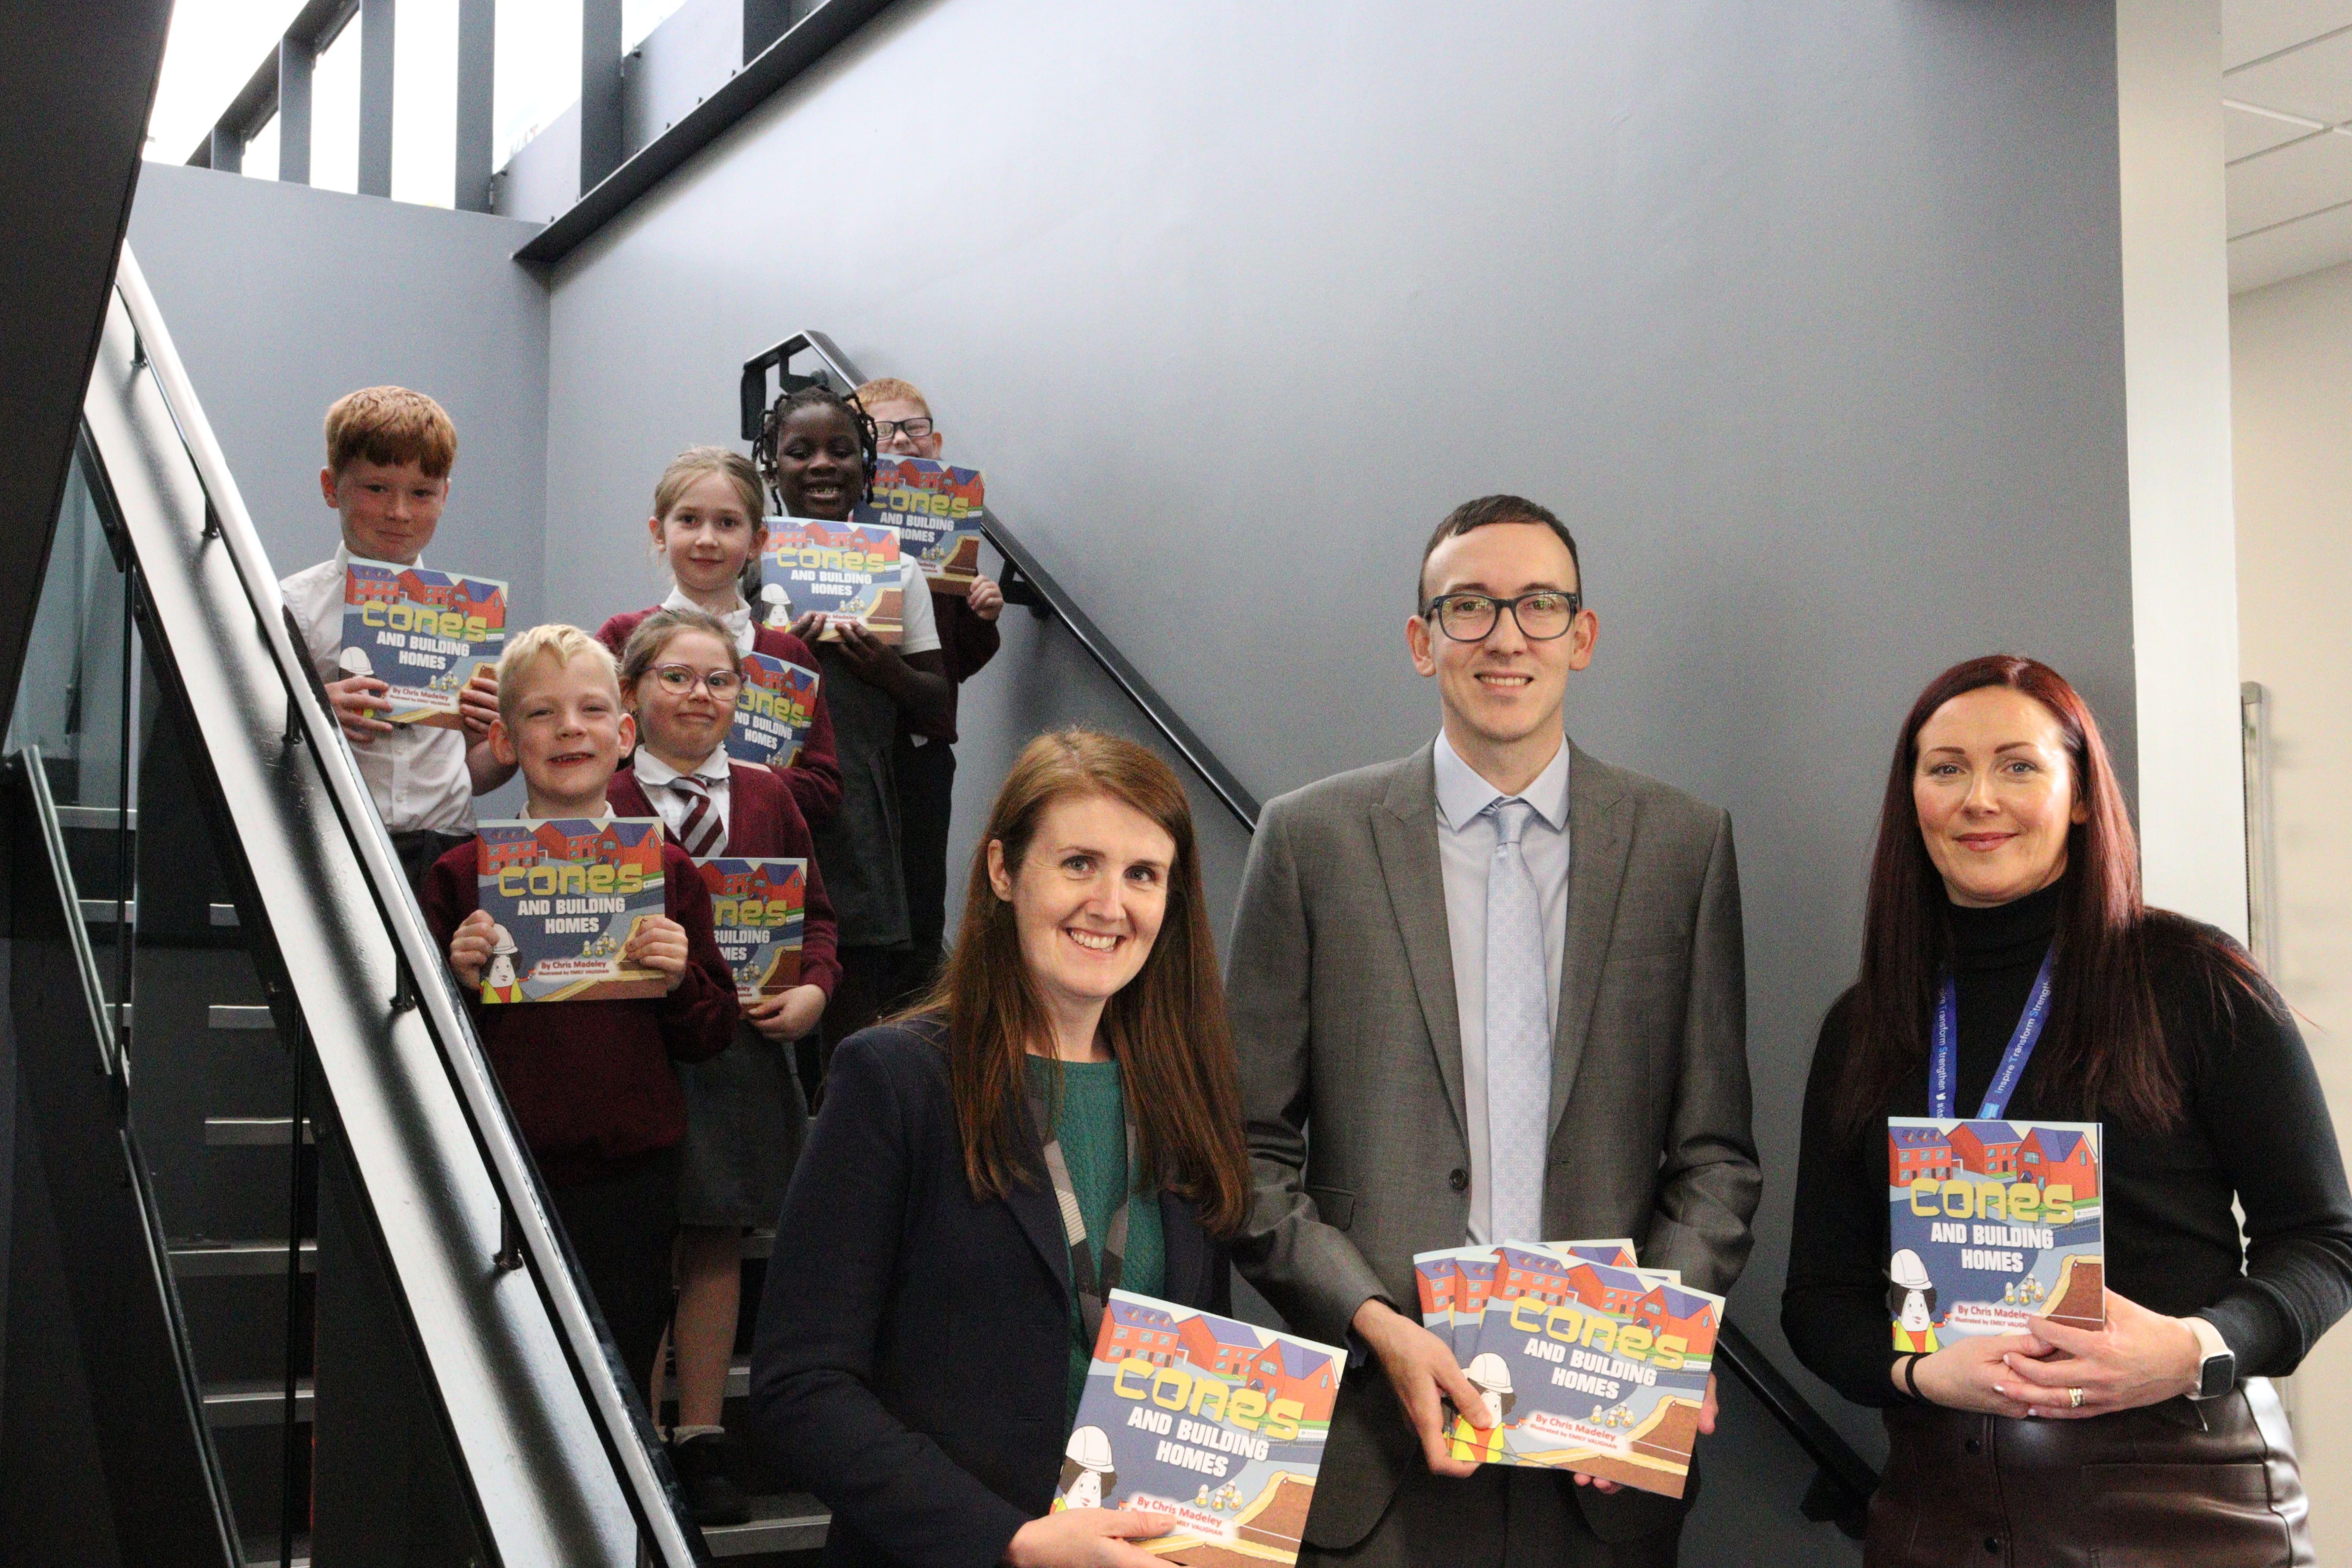 500 books to benefit primary pupils after Persimmon donation